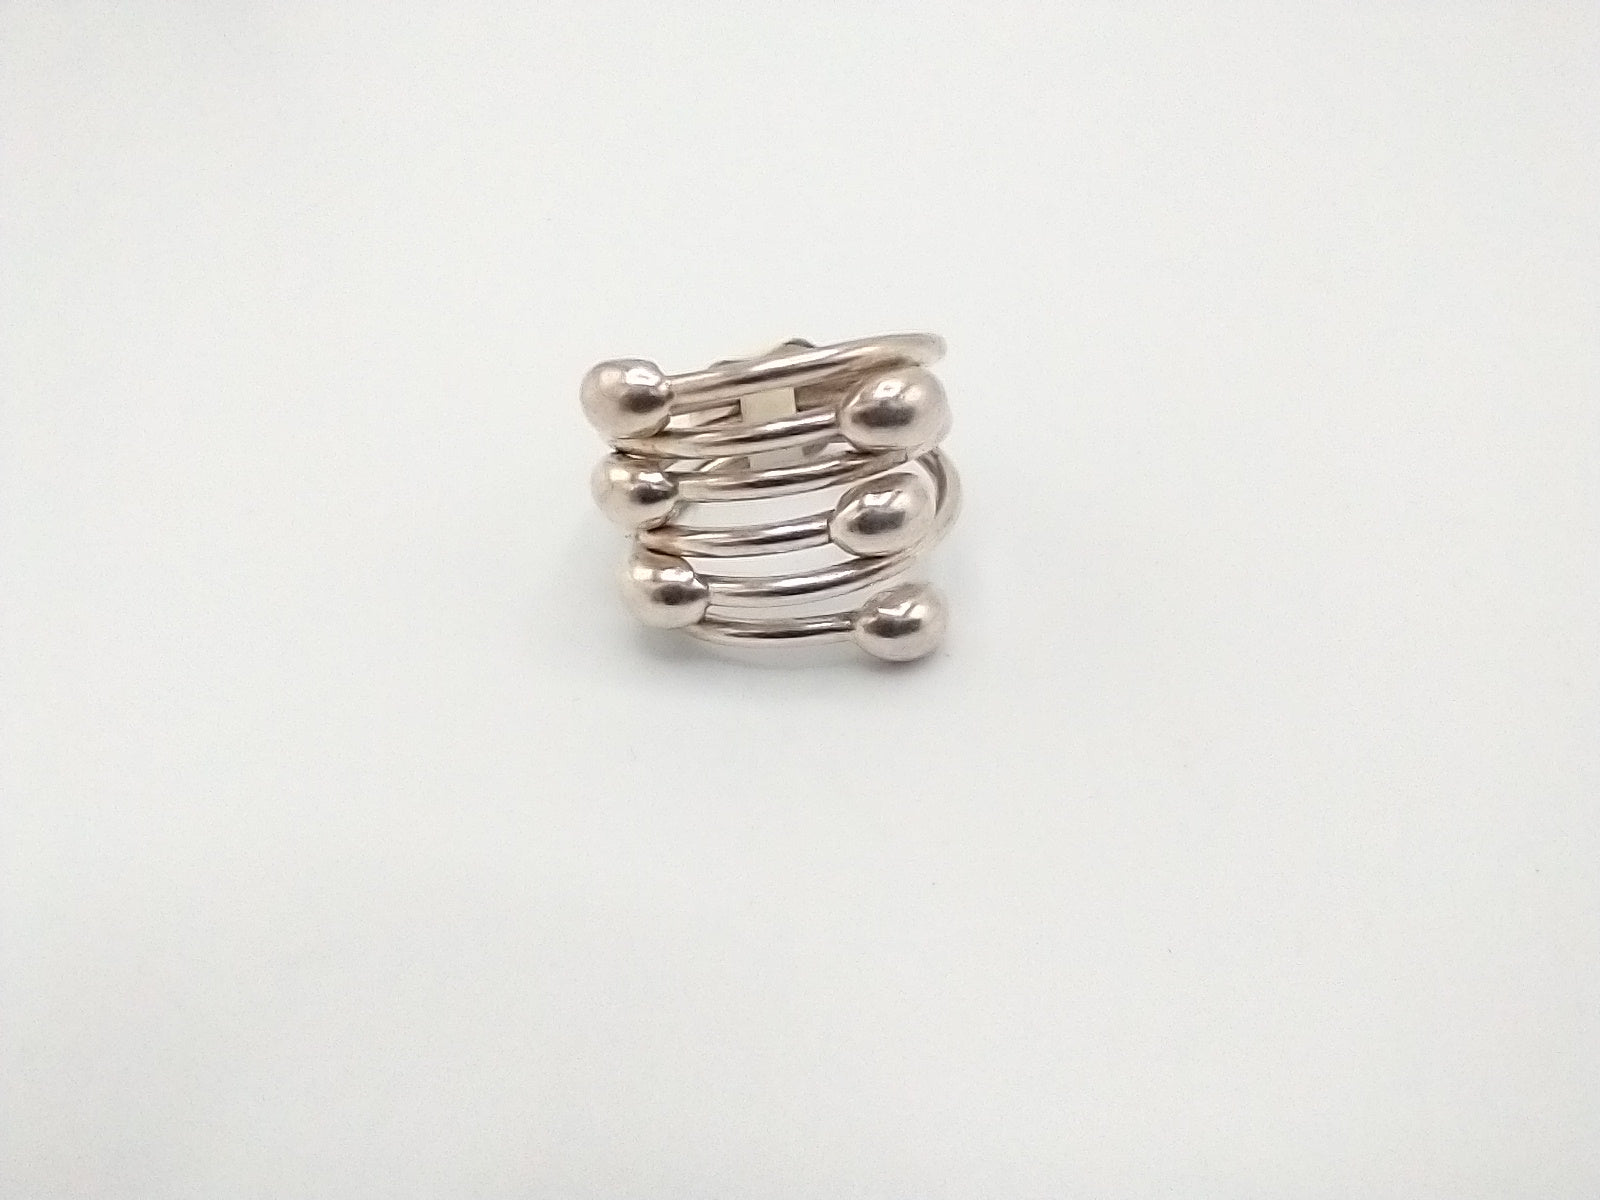 "CHRONOLOGICAL" Solid 925 sterling silver ring size 9...$75. One of a kind...SOLD OUT